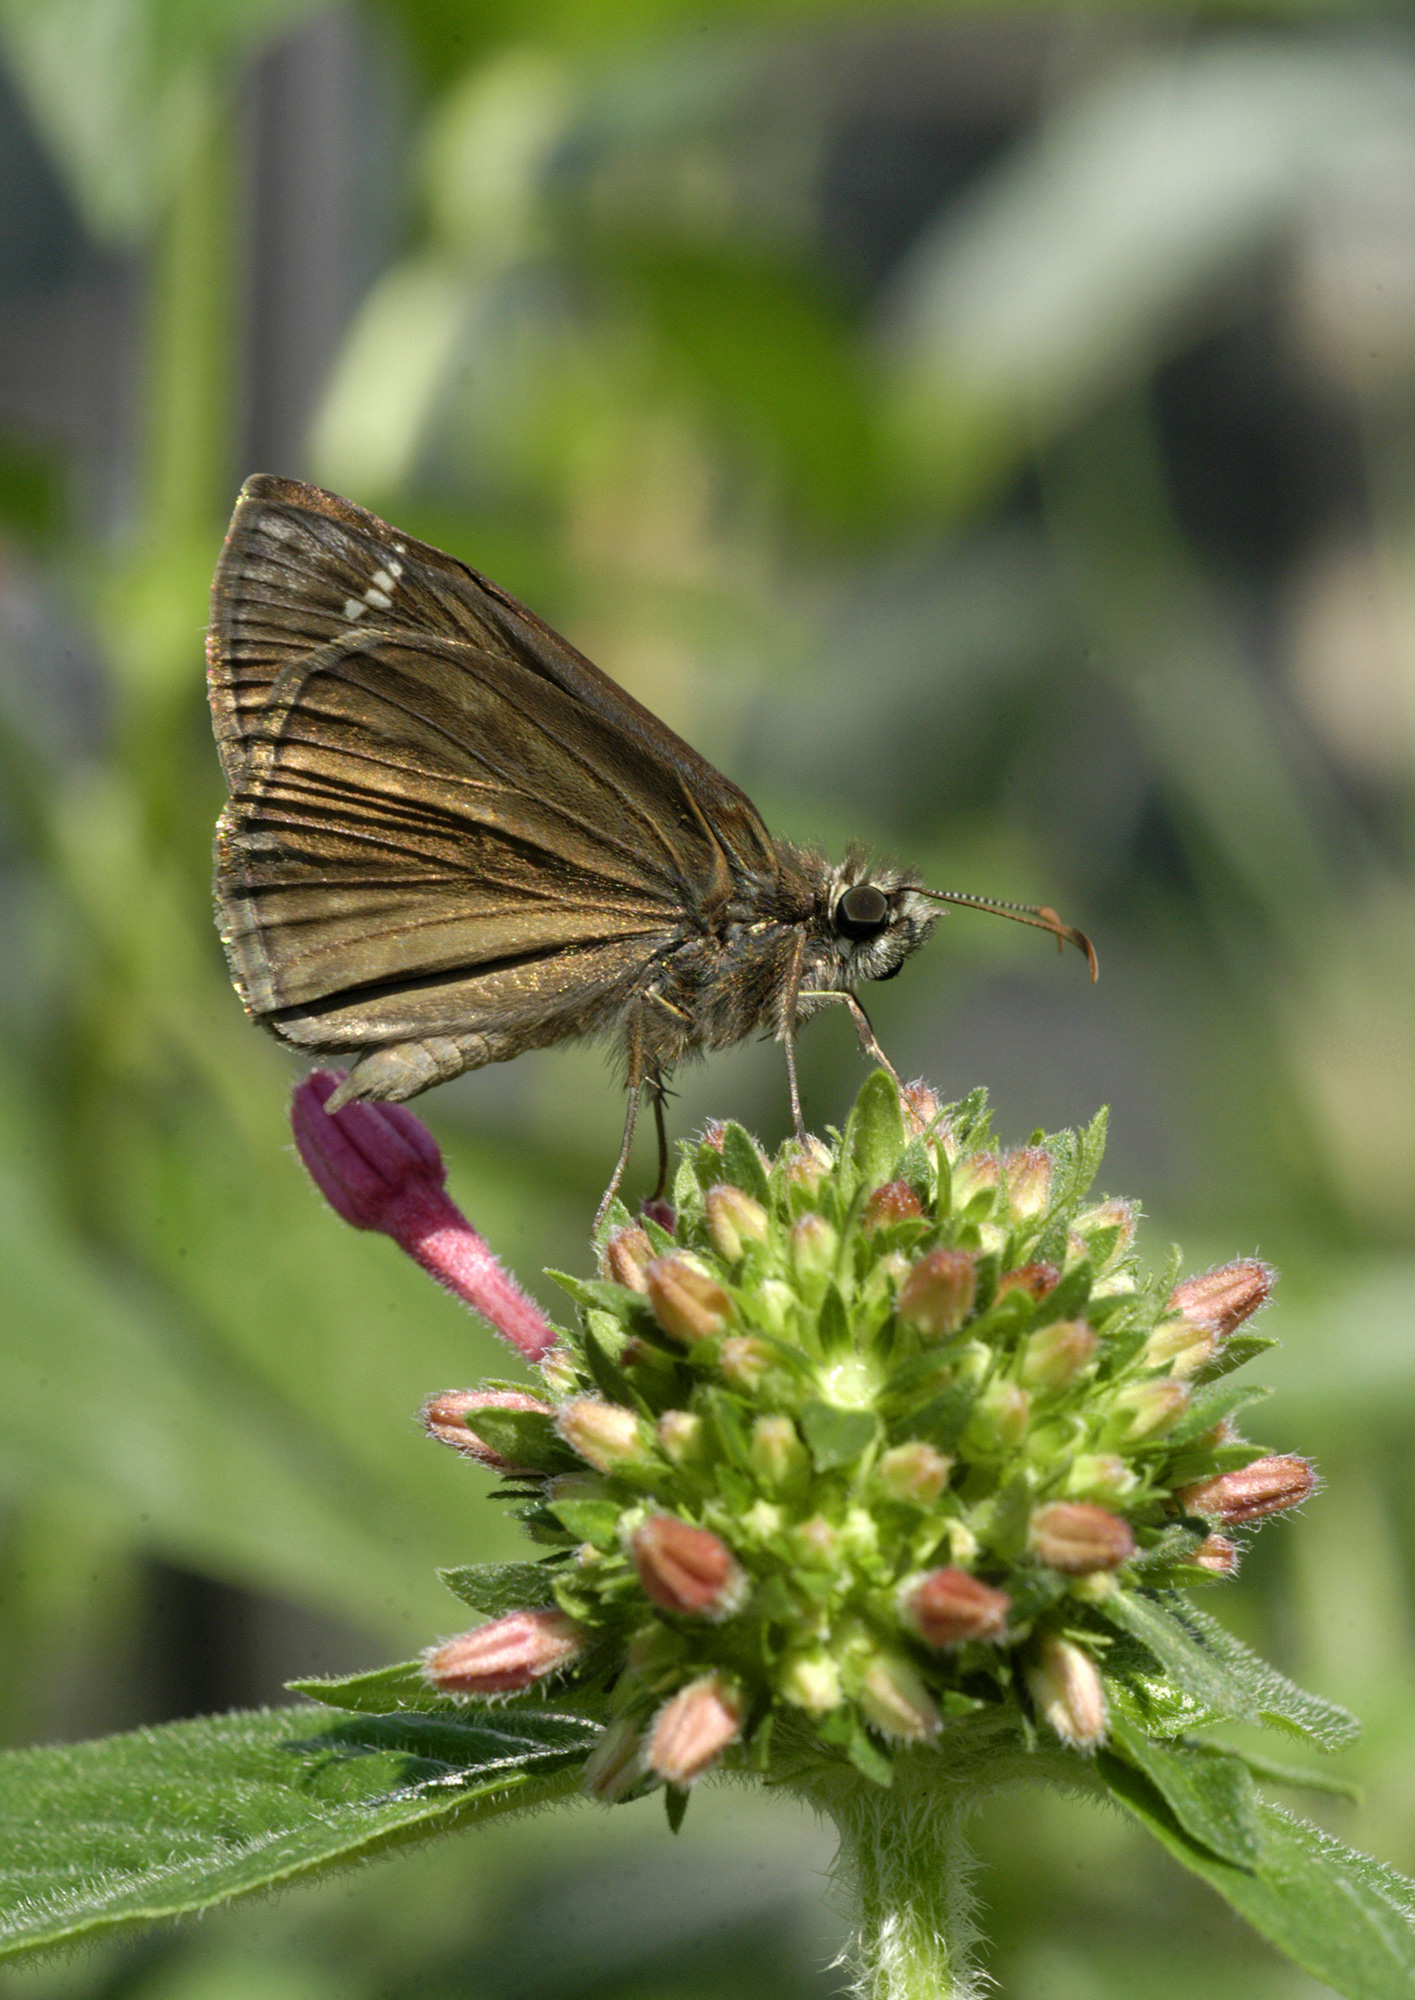 A brown butterfly rests on green flower buds